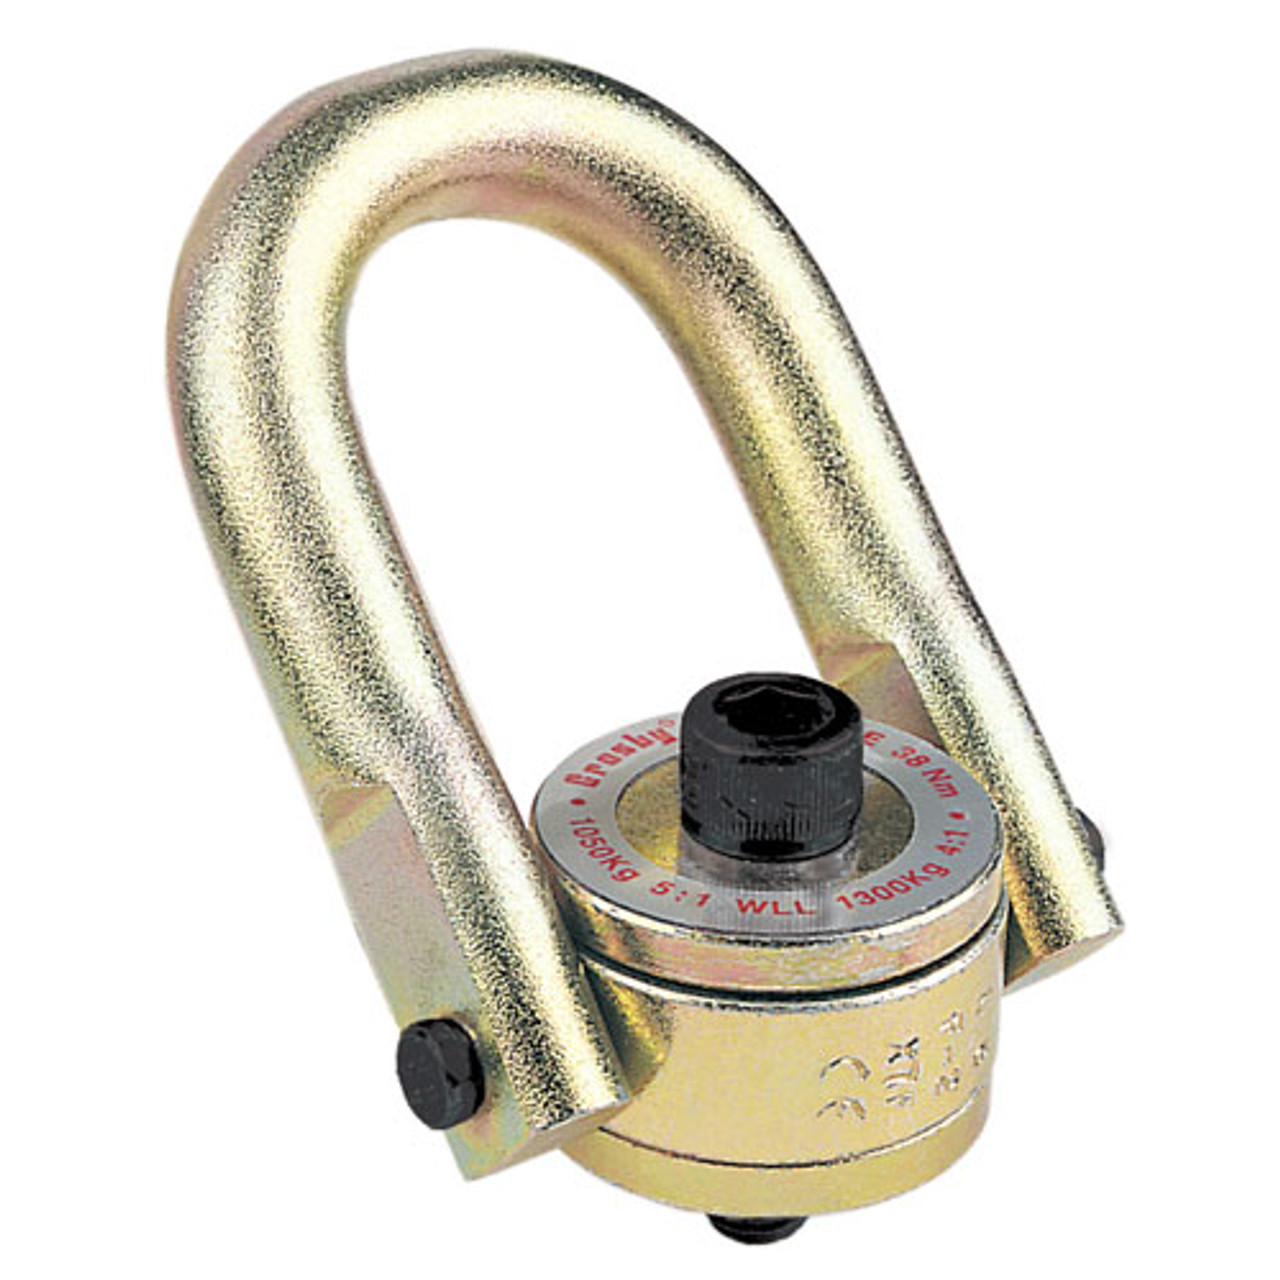 HR safety snap hook - With swivel - Length: 70 mm